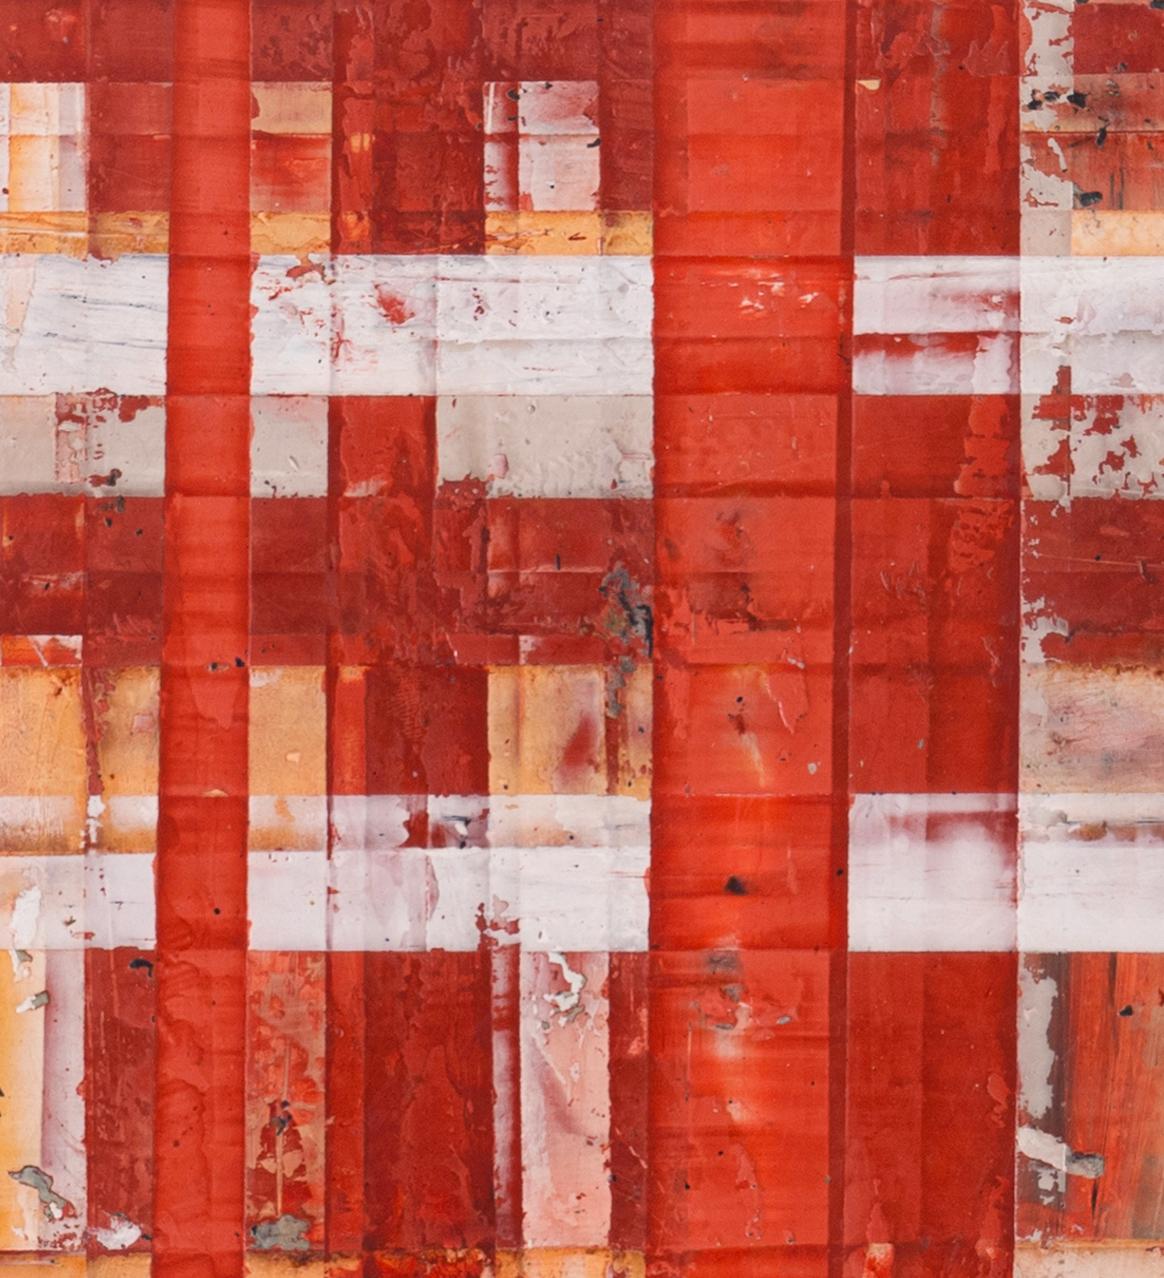 Big Little #144 (Contemporary Plaid Cross-Hatched Pattern Geometric Abstraction) - Orange Abstract Painting by Vincent Pomilio